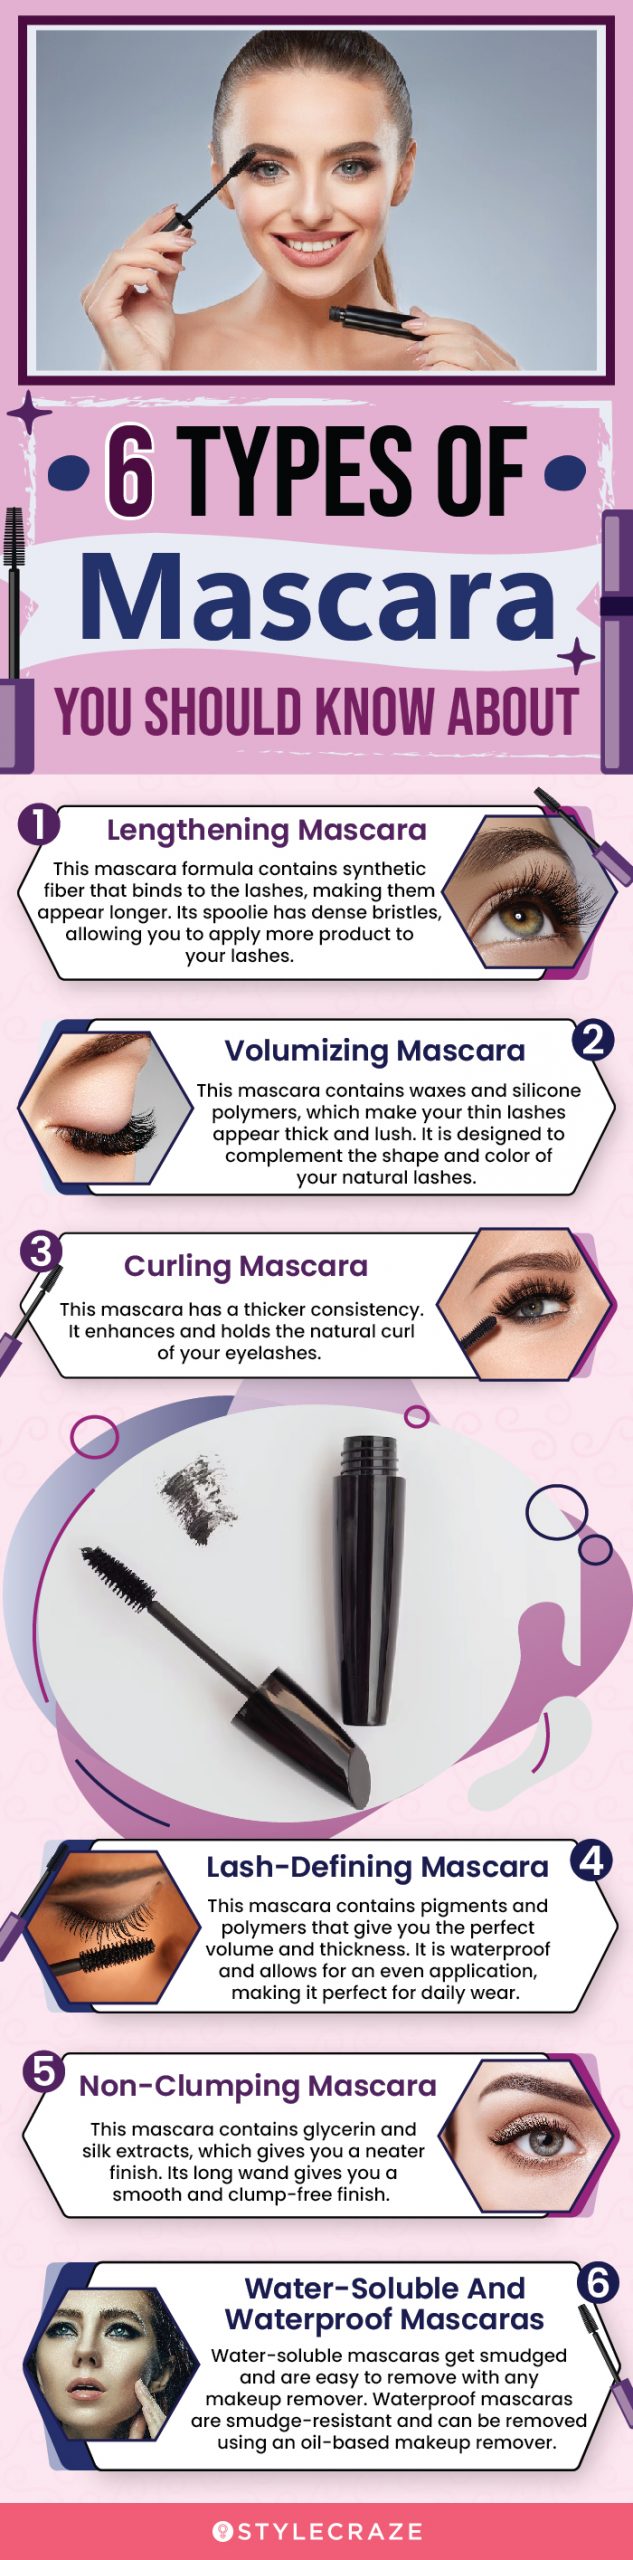 6 types of mascara you should know about (infographic)